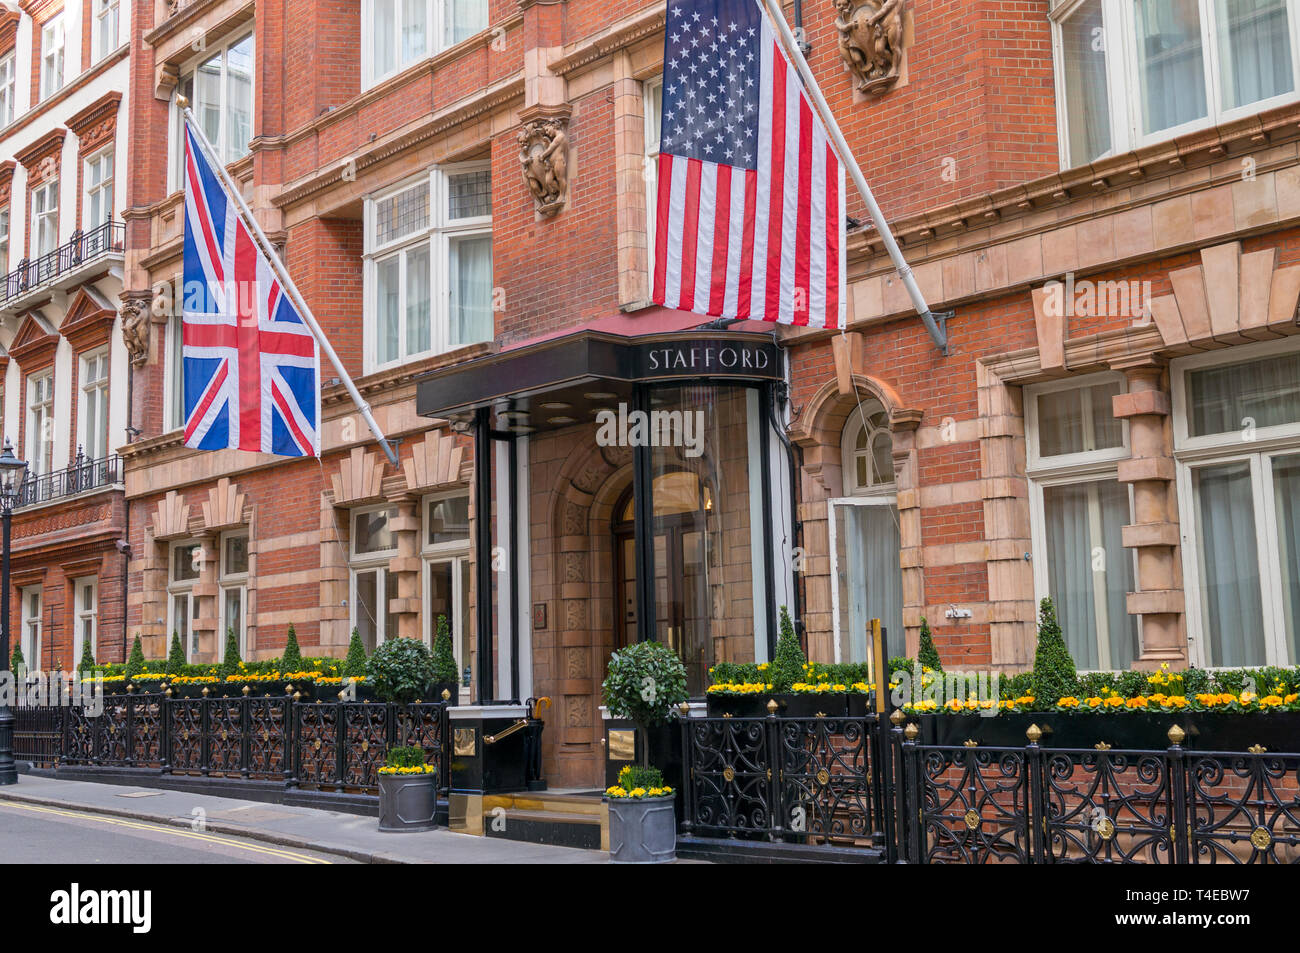 The entrance to the Stafford Hotel in London with a Union Jack (British flag) and American flag on either side. Stock Photo